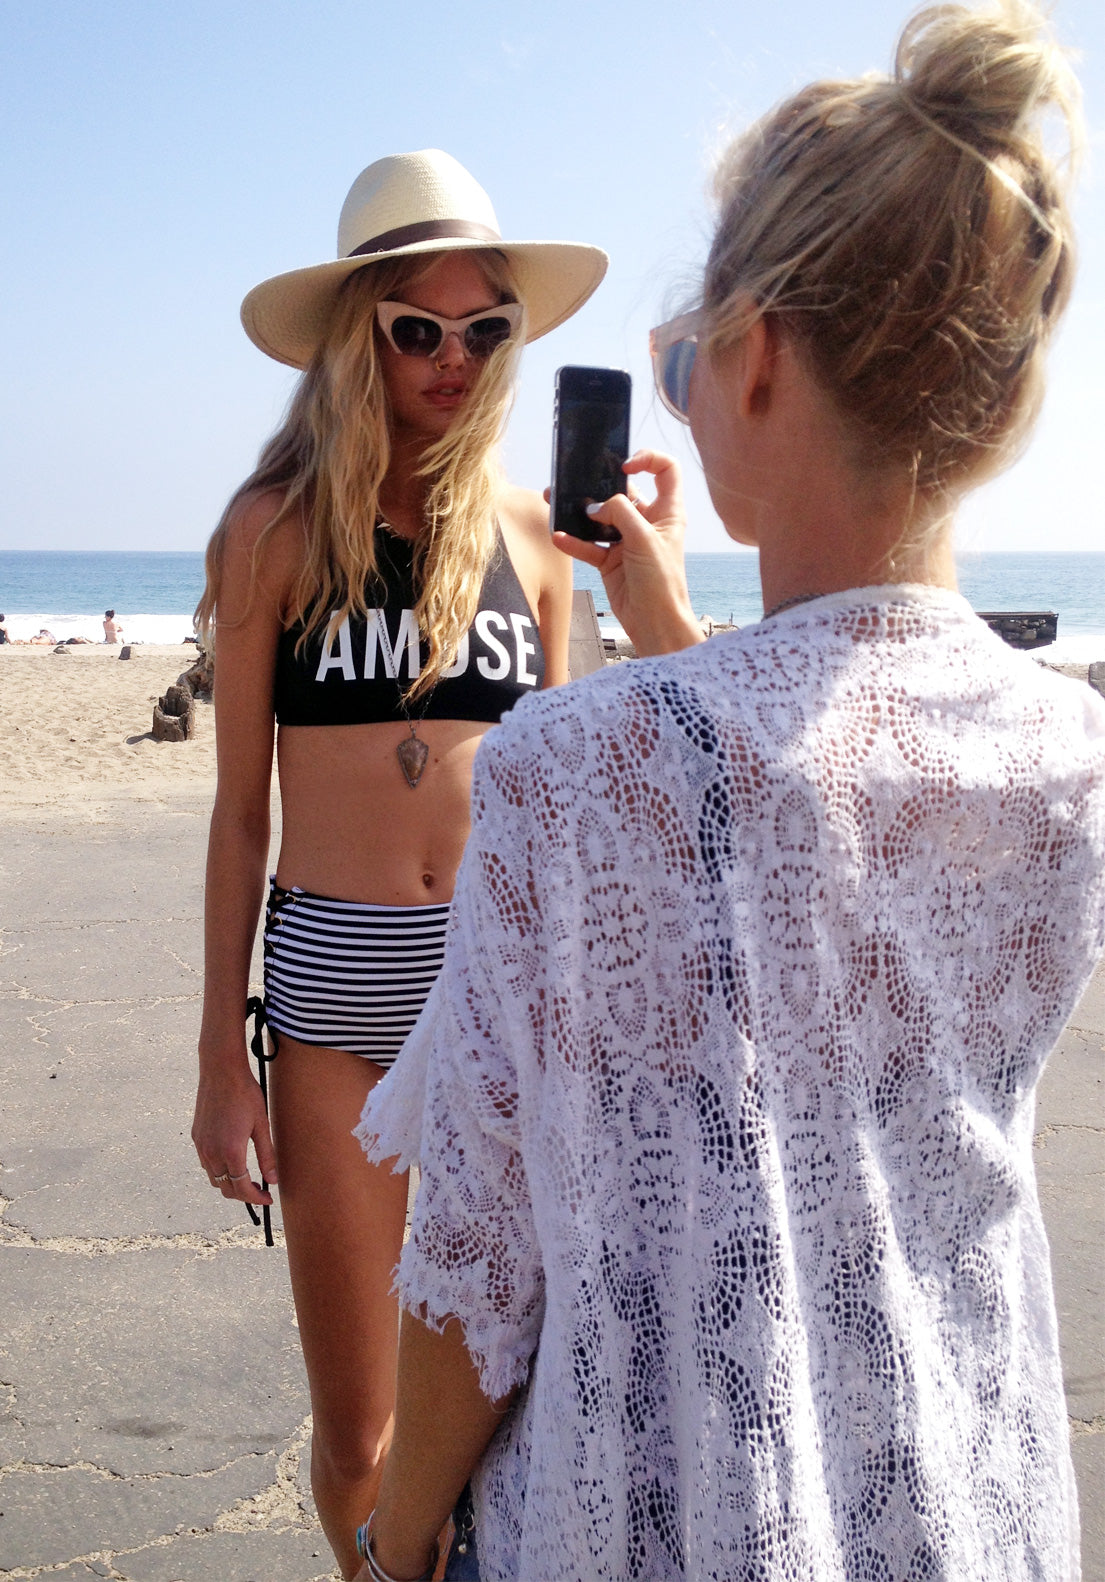 Woman taking photos of model in Amuse swimsuit on the beach